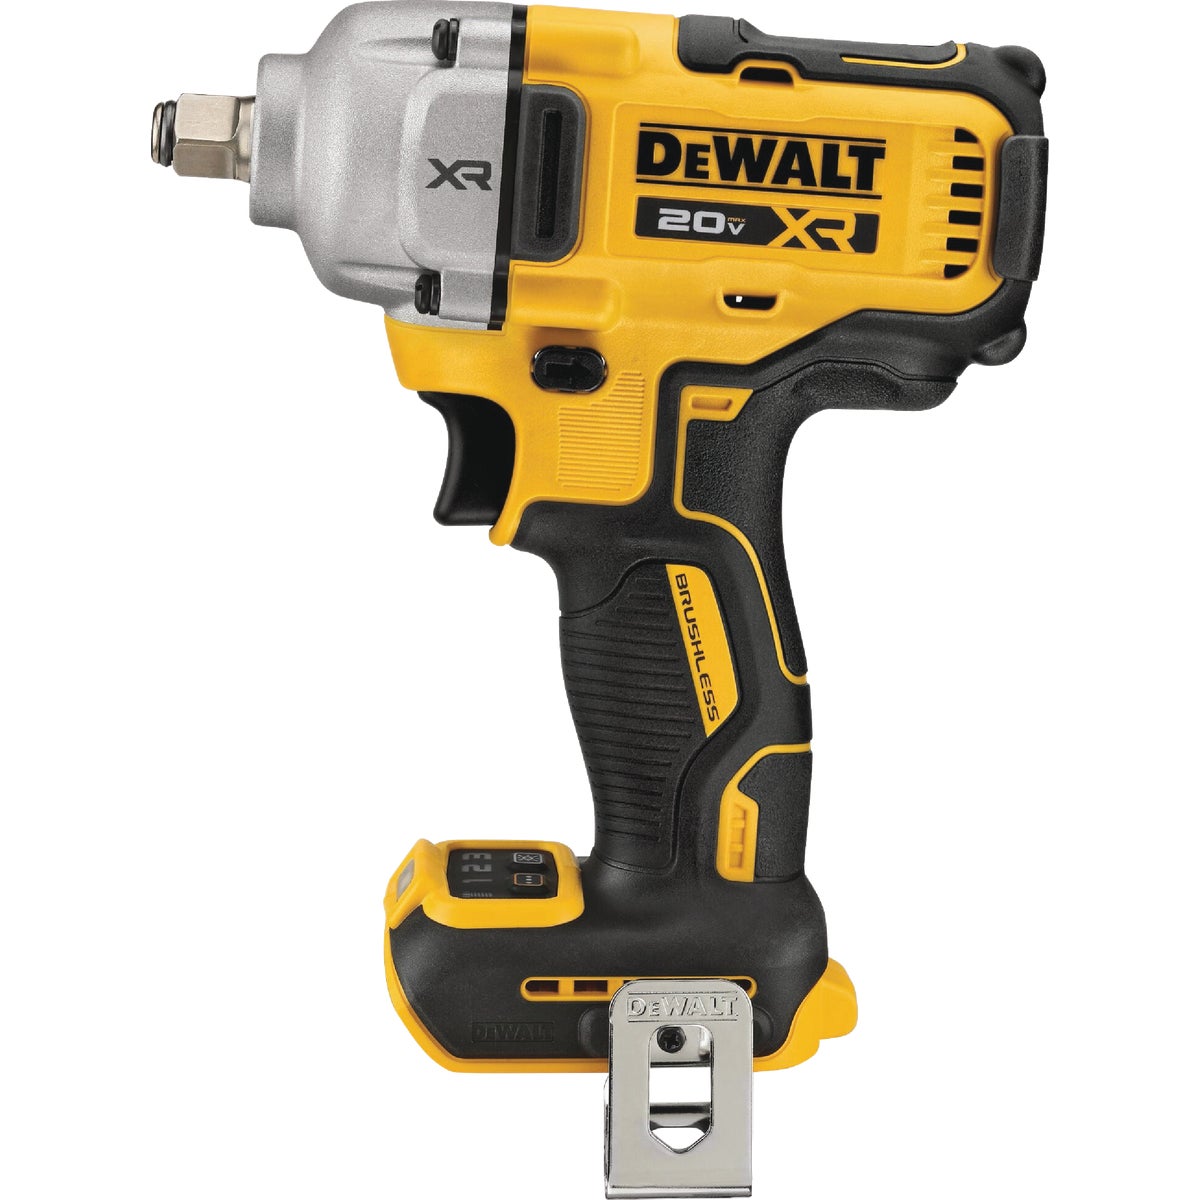 DEWALT 20V MAX XR Lithium-Ion 1/2 In. Mid-Range Cordless Impact Wrench with Hog Ring Anvil (Tool Only)